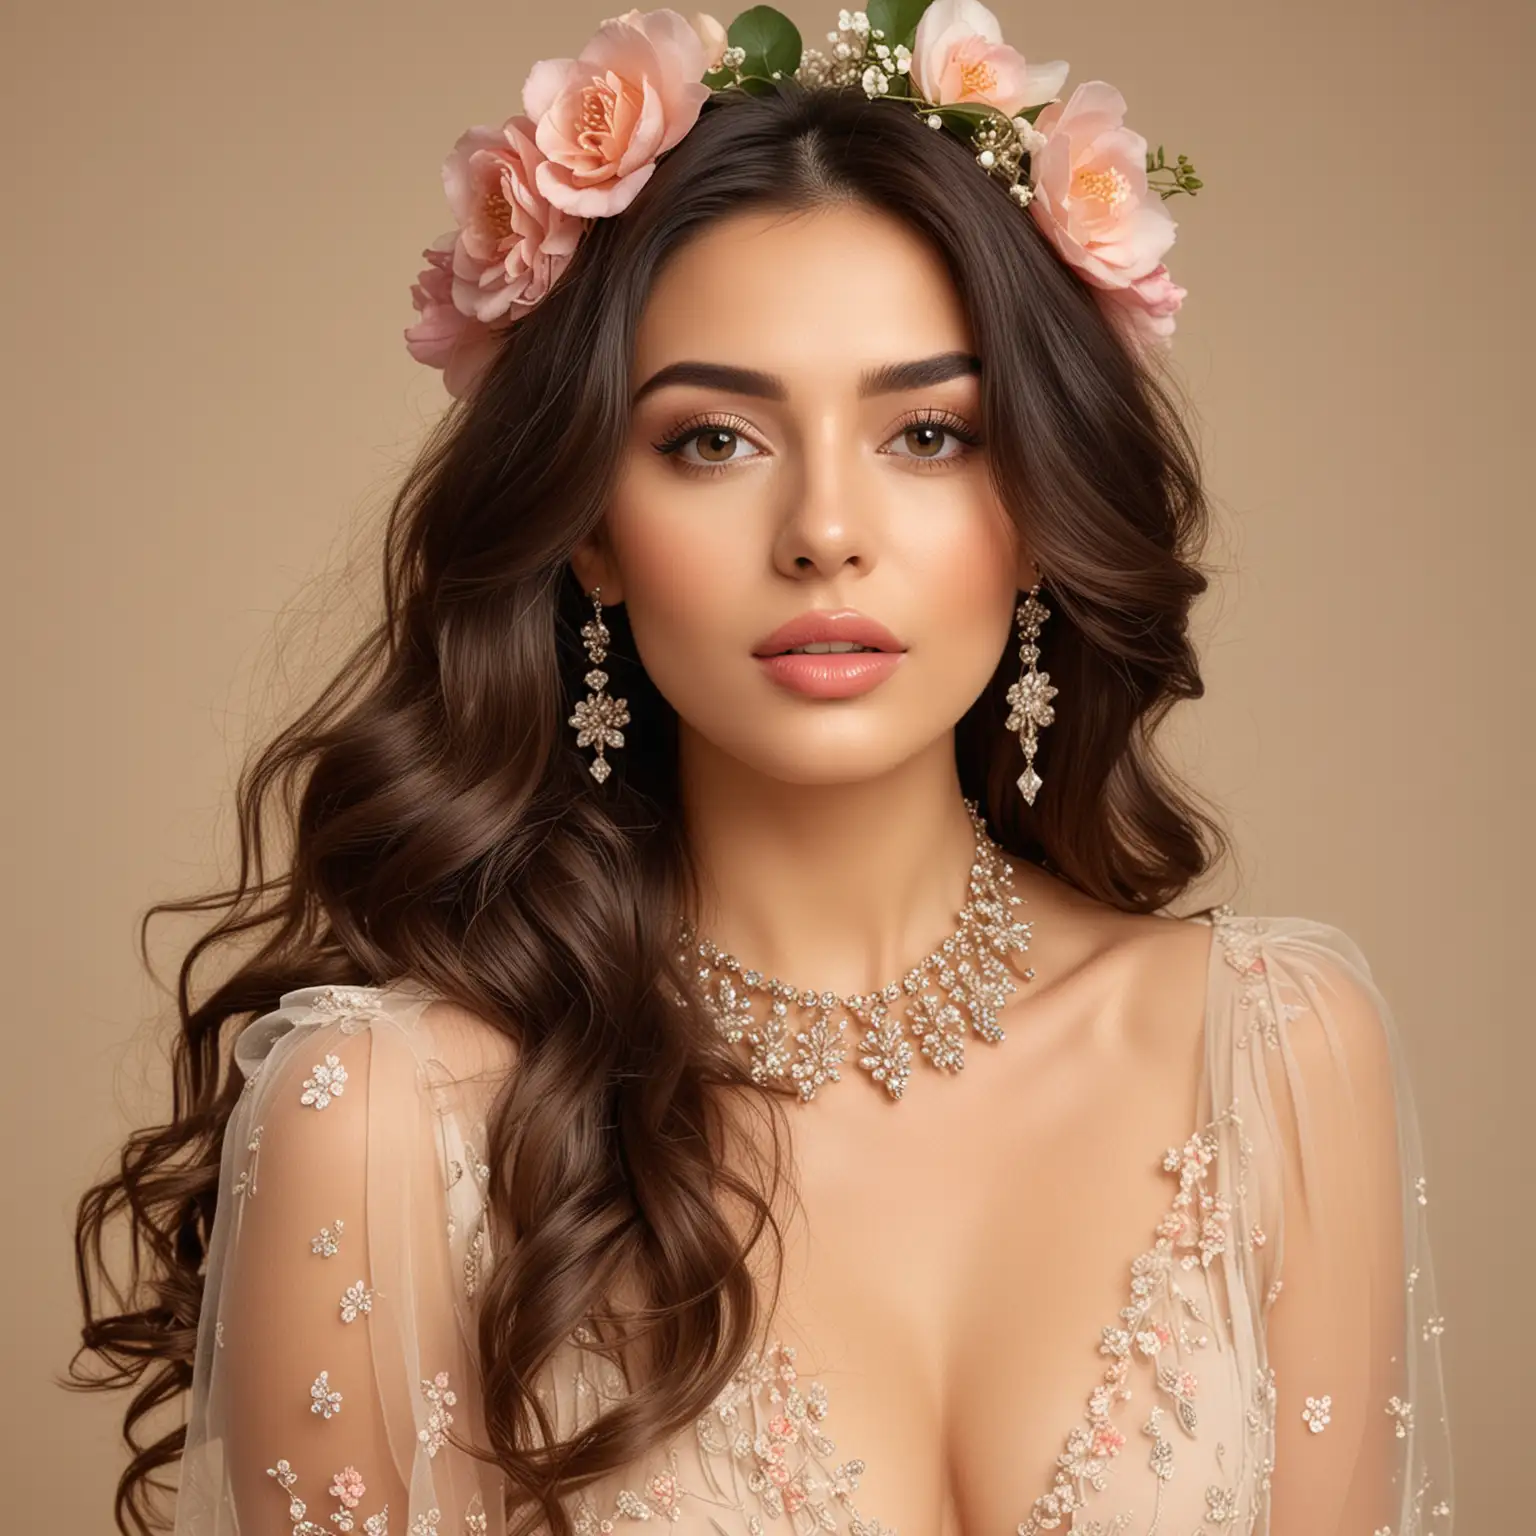 photoshoot with beige background of beautiful woman, dressed nicely with sheer blouse, nice jewelry, beautiful lips, makeup, long wavy hair, with floral props all around her